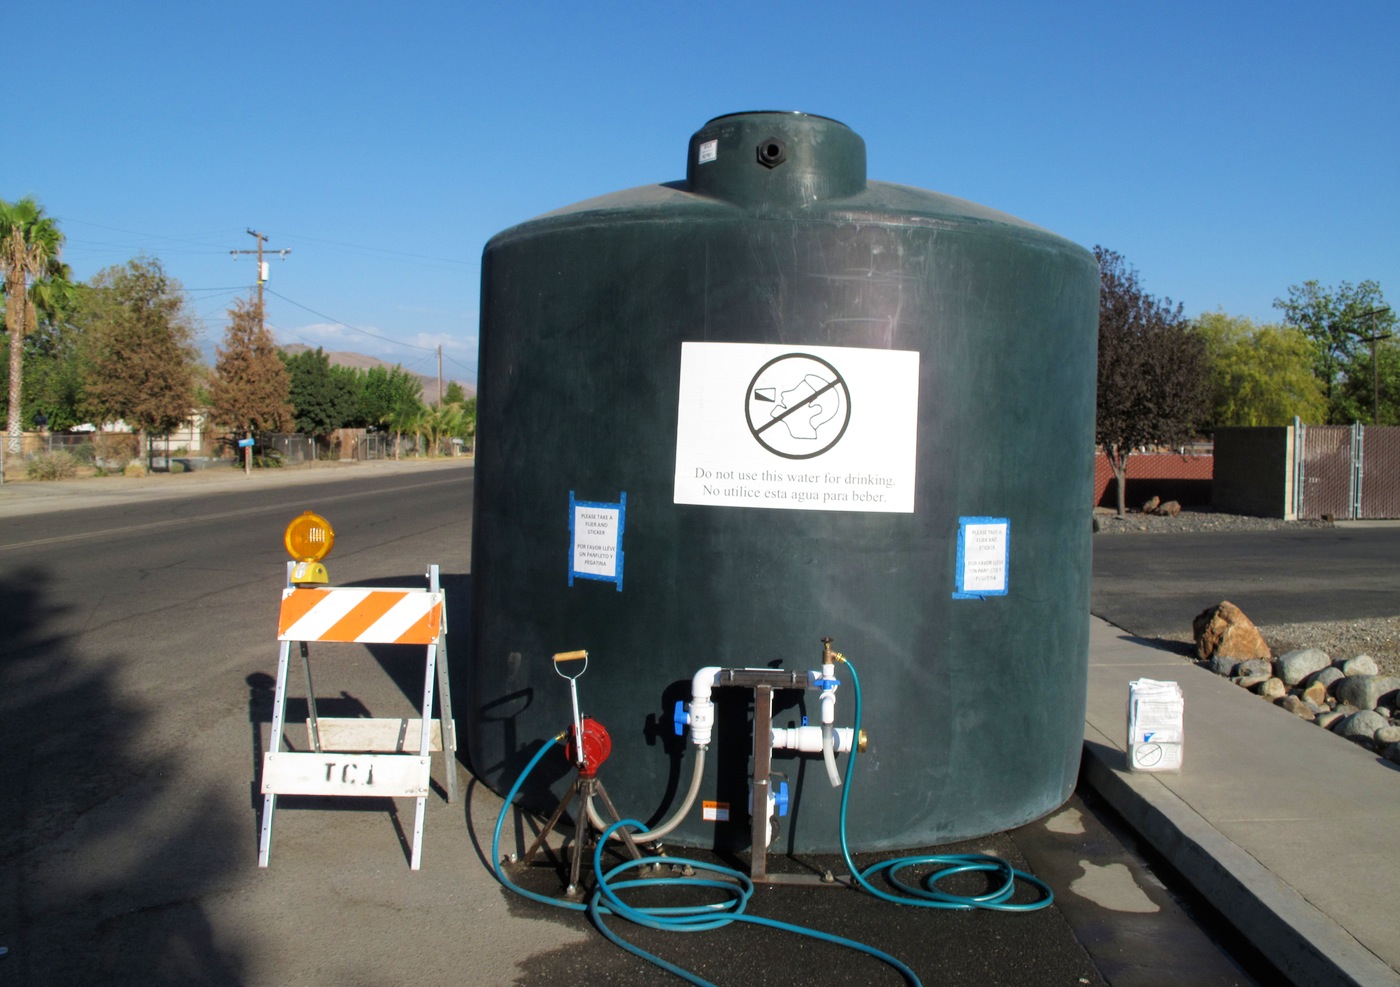 Residents whose wells have run dry can draw water from this 5,000-gallon (18,900-liter) water tank in East Porterville, Calif. The health department recently completed a survey about the impacts of the drought on East Porterville and a neighboring community.